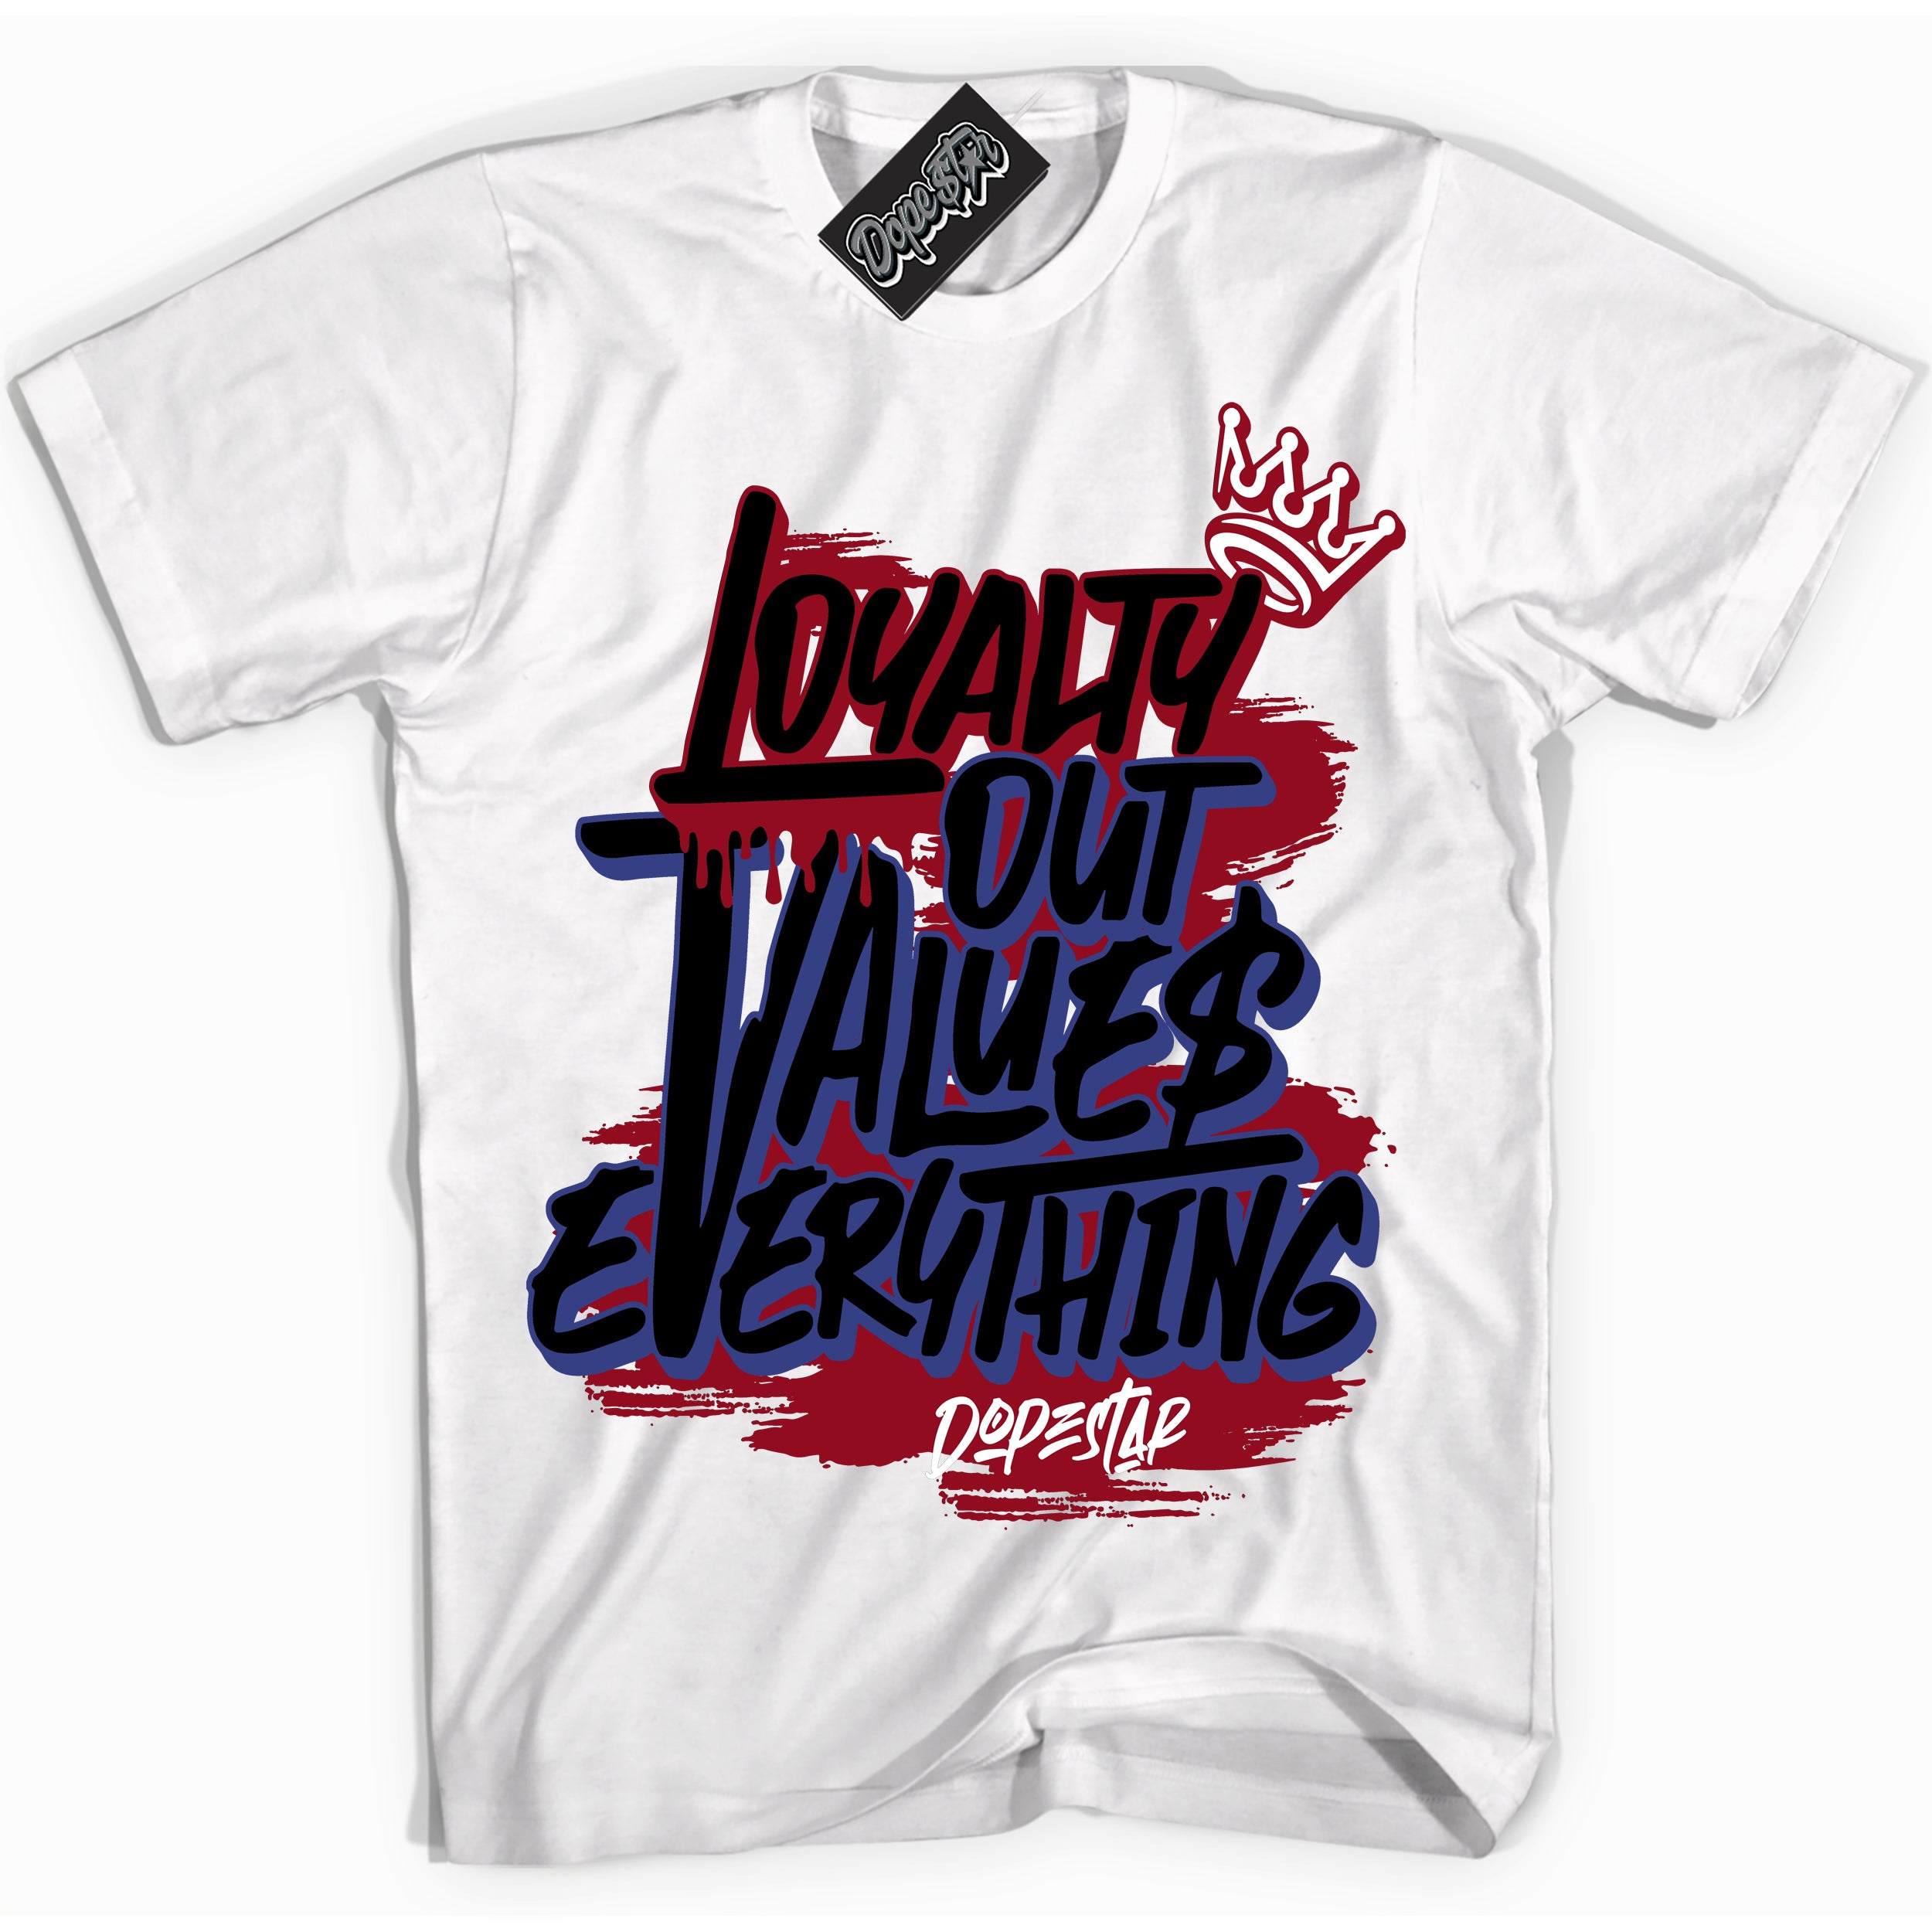 Cool White Shirt with “ Loyalty Out Values Everything” design that perfectly matches Playoffs 8s Sneakers.